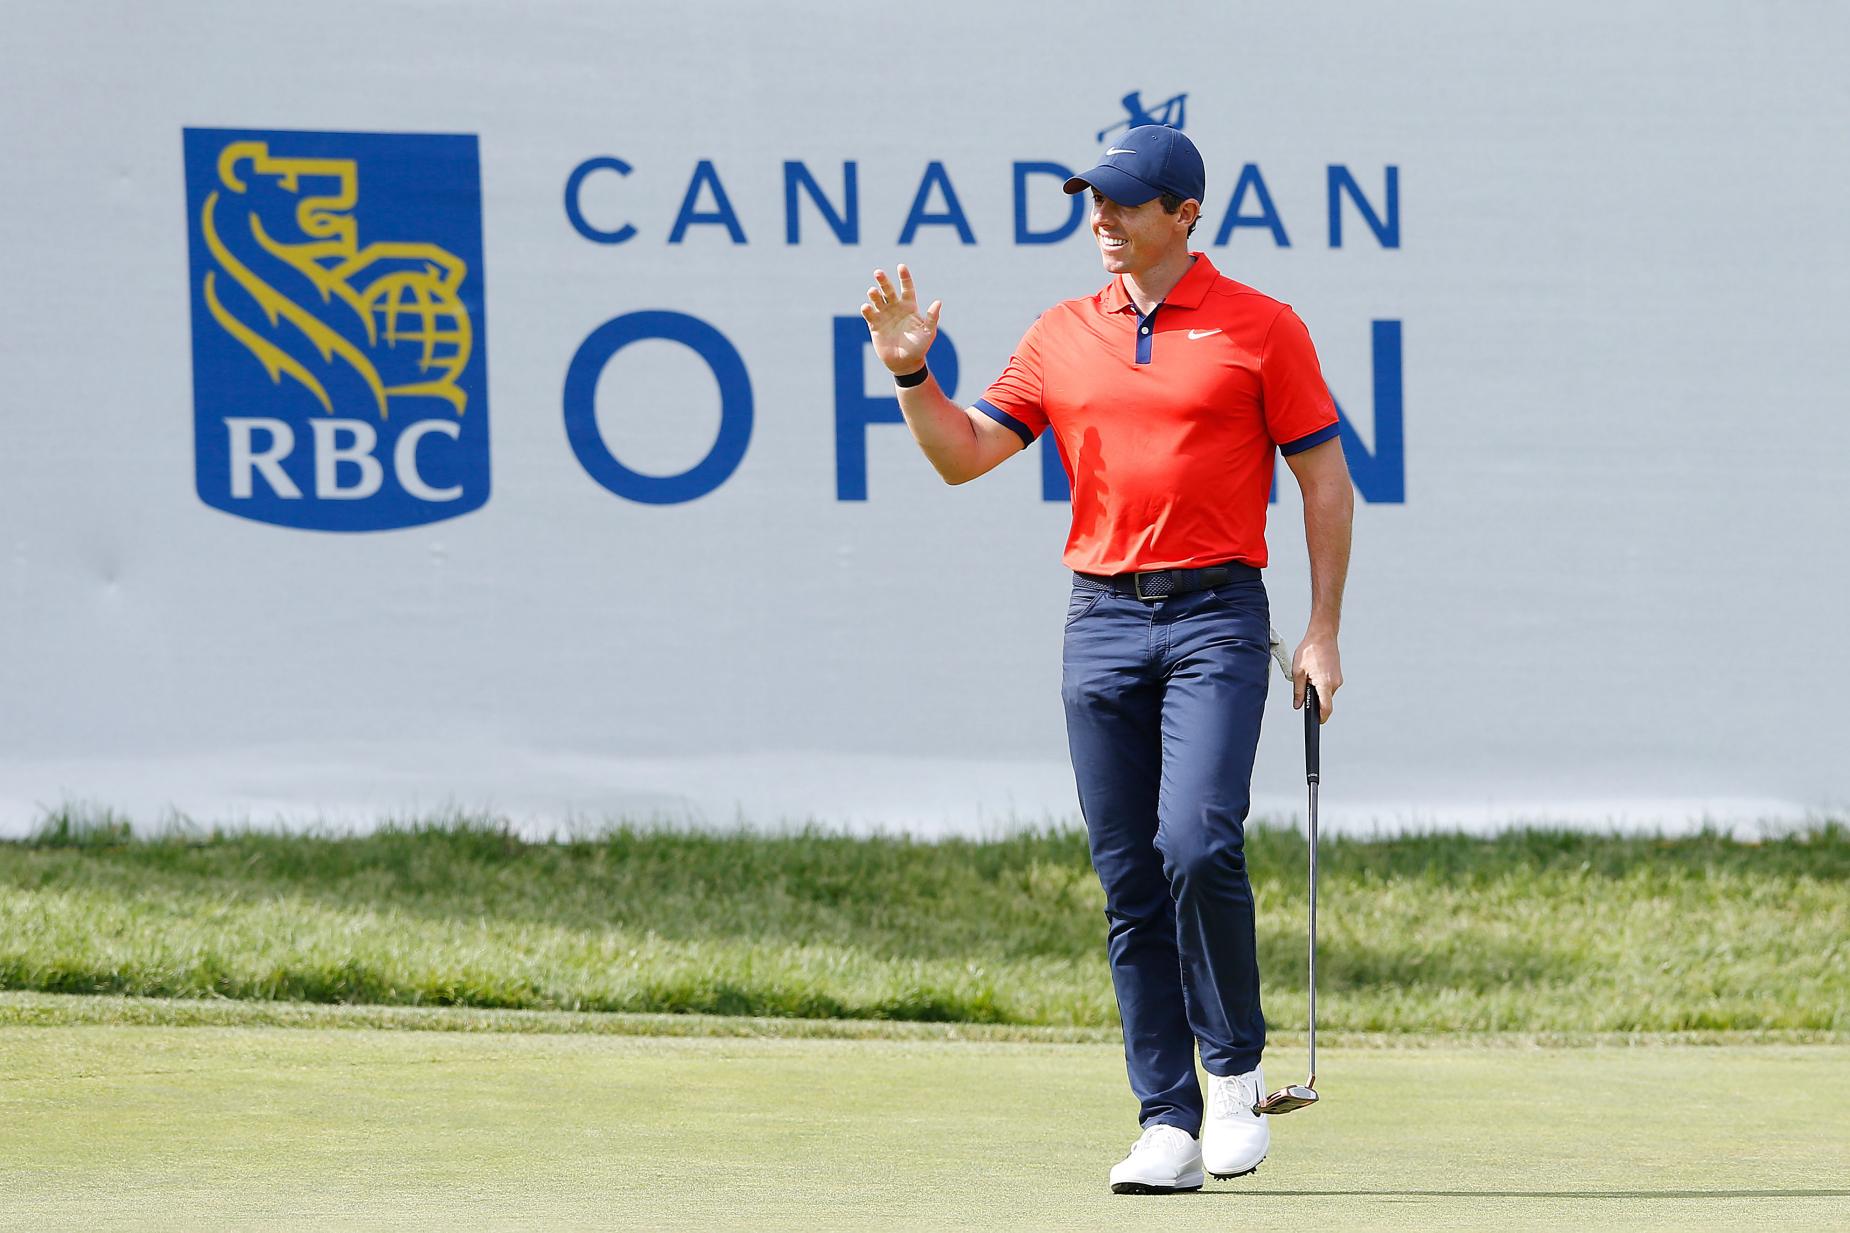 Here's the prize money payout for each golfer at the 2019 RBC Canadian